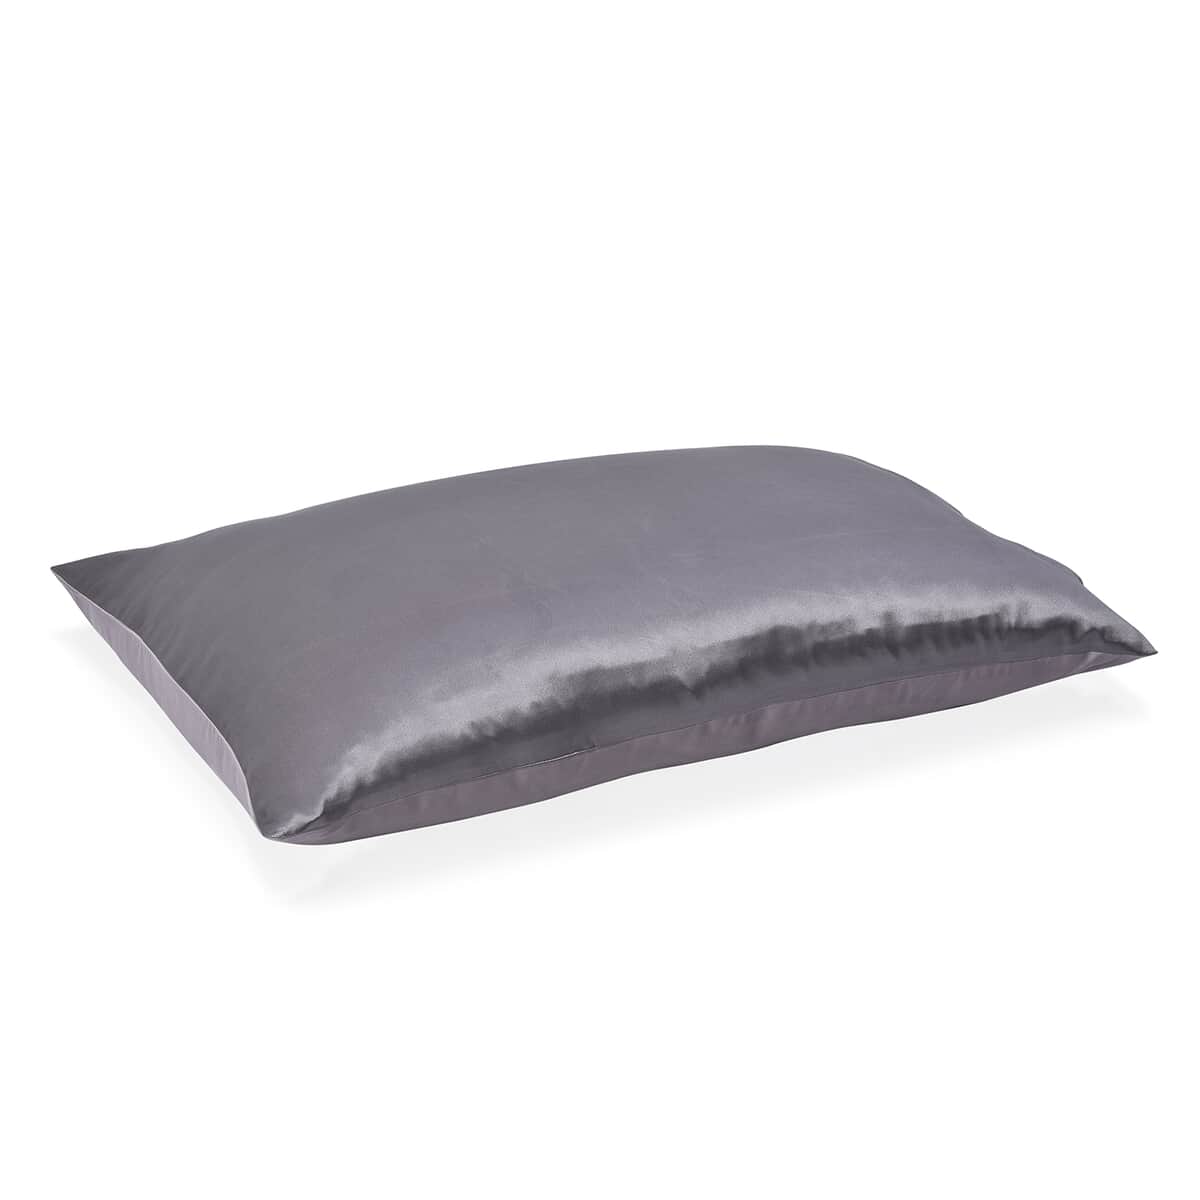 Symphony Home Gray 100% Mulberry Silk Pillowcase Infused with Hyaluronic Acid & Argan Oil - King, Pillow Protectors, Pillow Cover, Cushion Cover, Pillow Shams, Pillow Case Covers image number 0